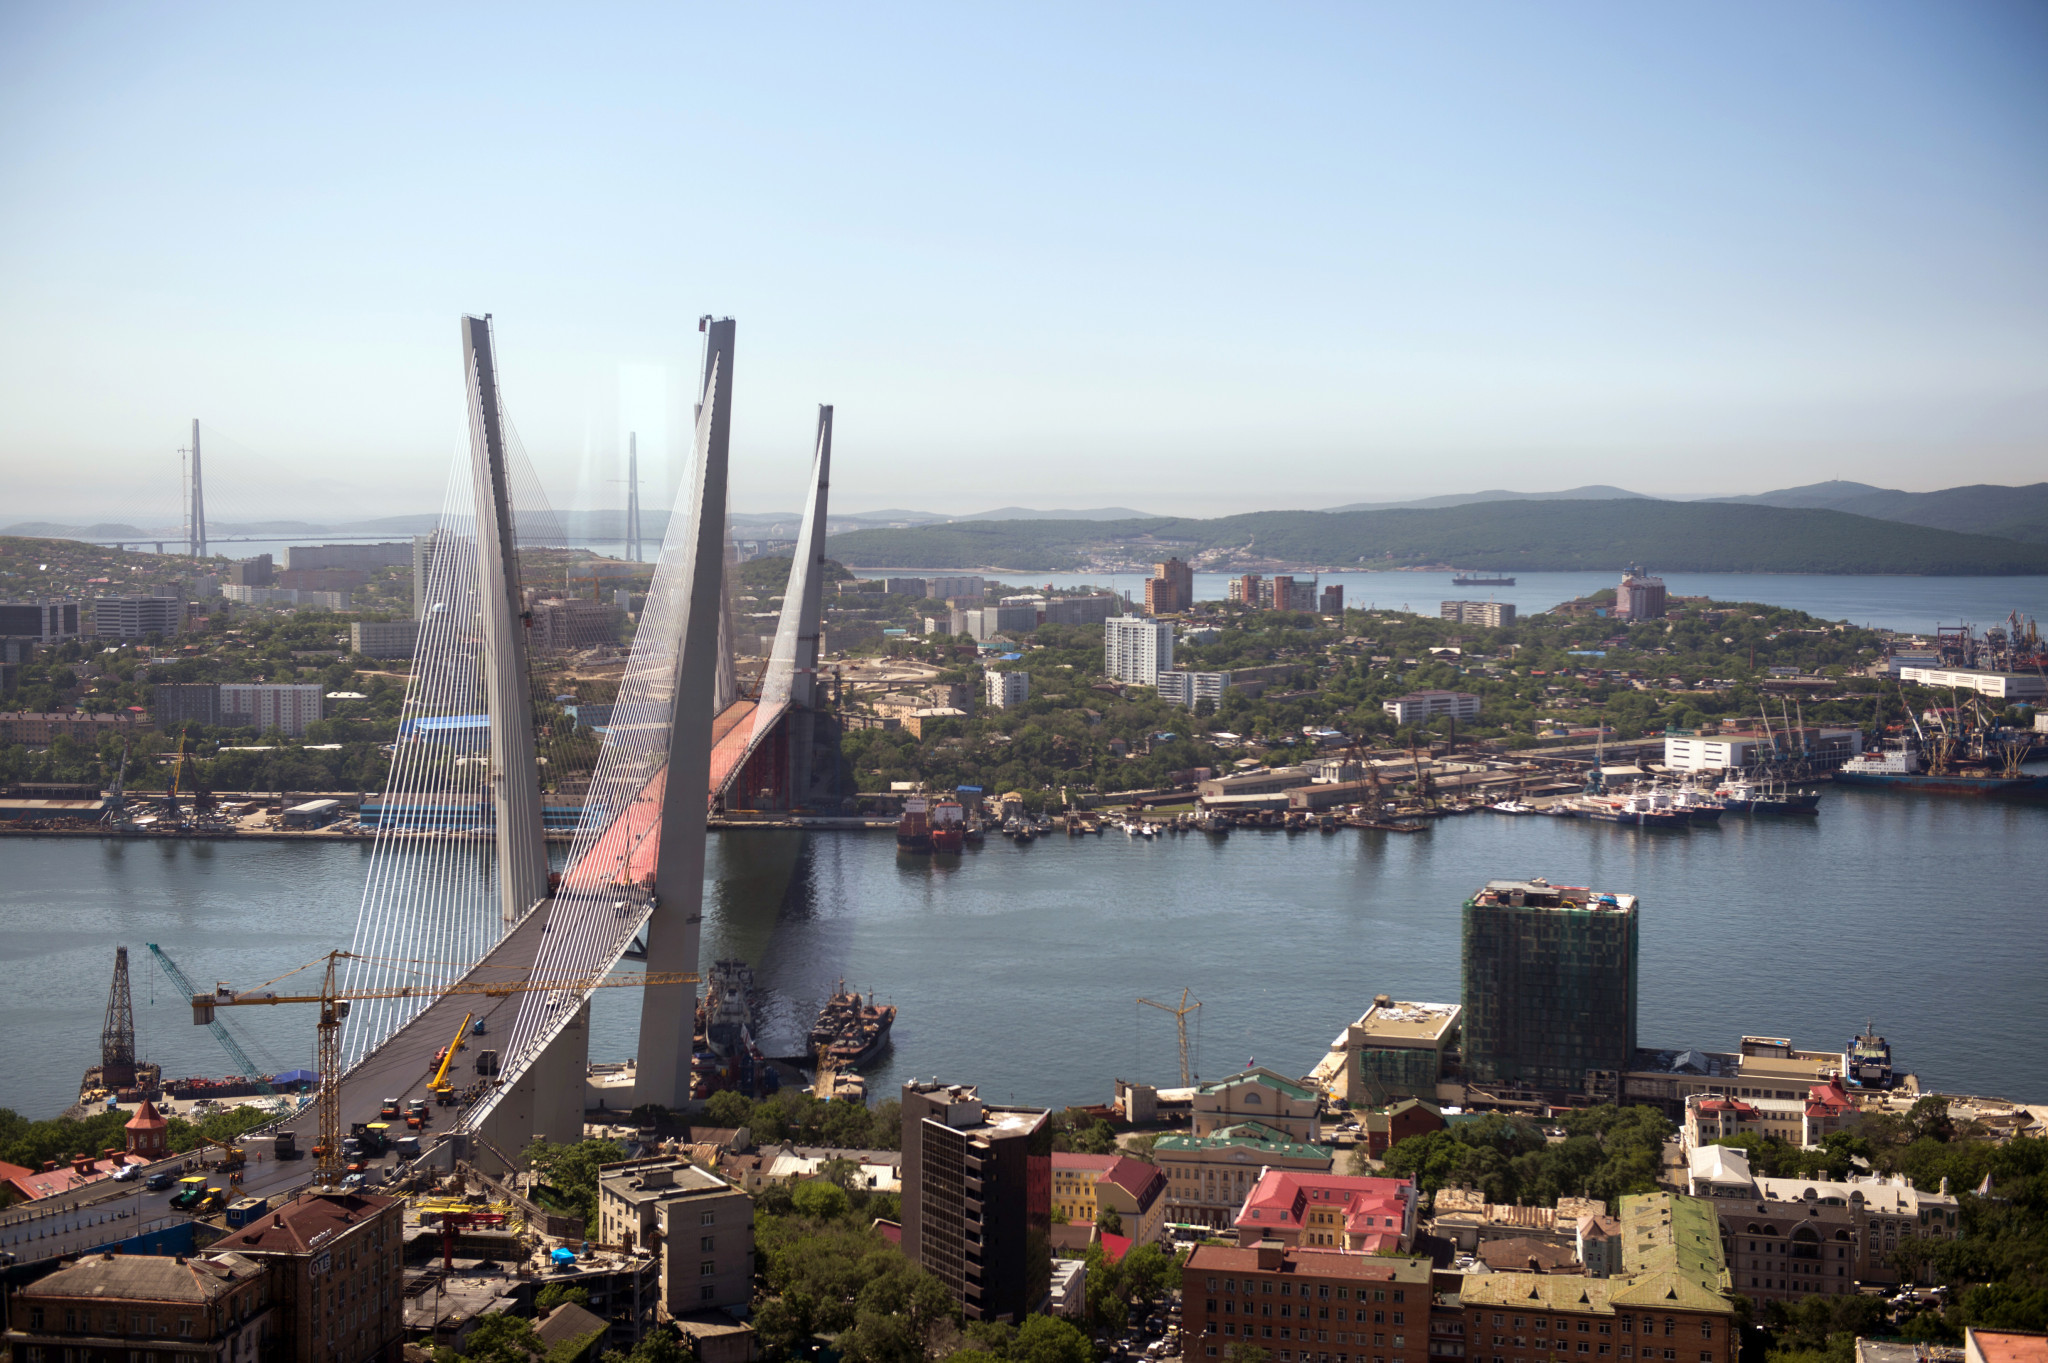 Vladivostok is set to host the seventh edition of the Children of Asia Games ©Getty Images